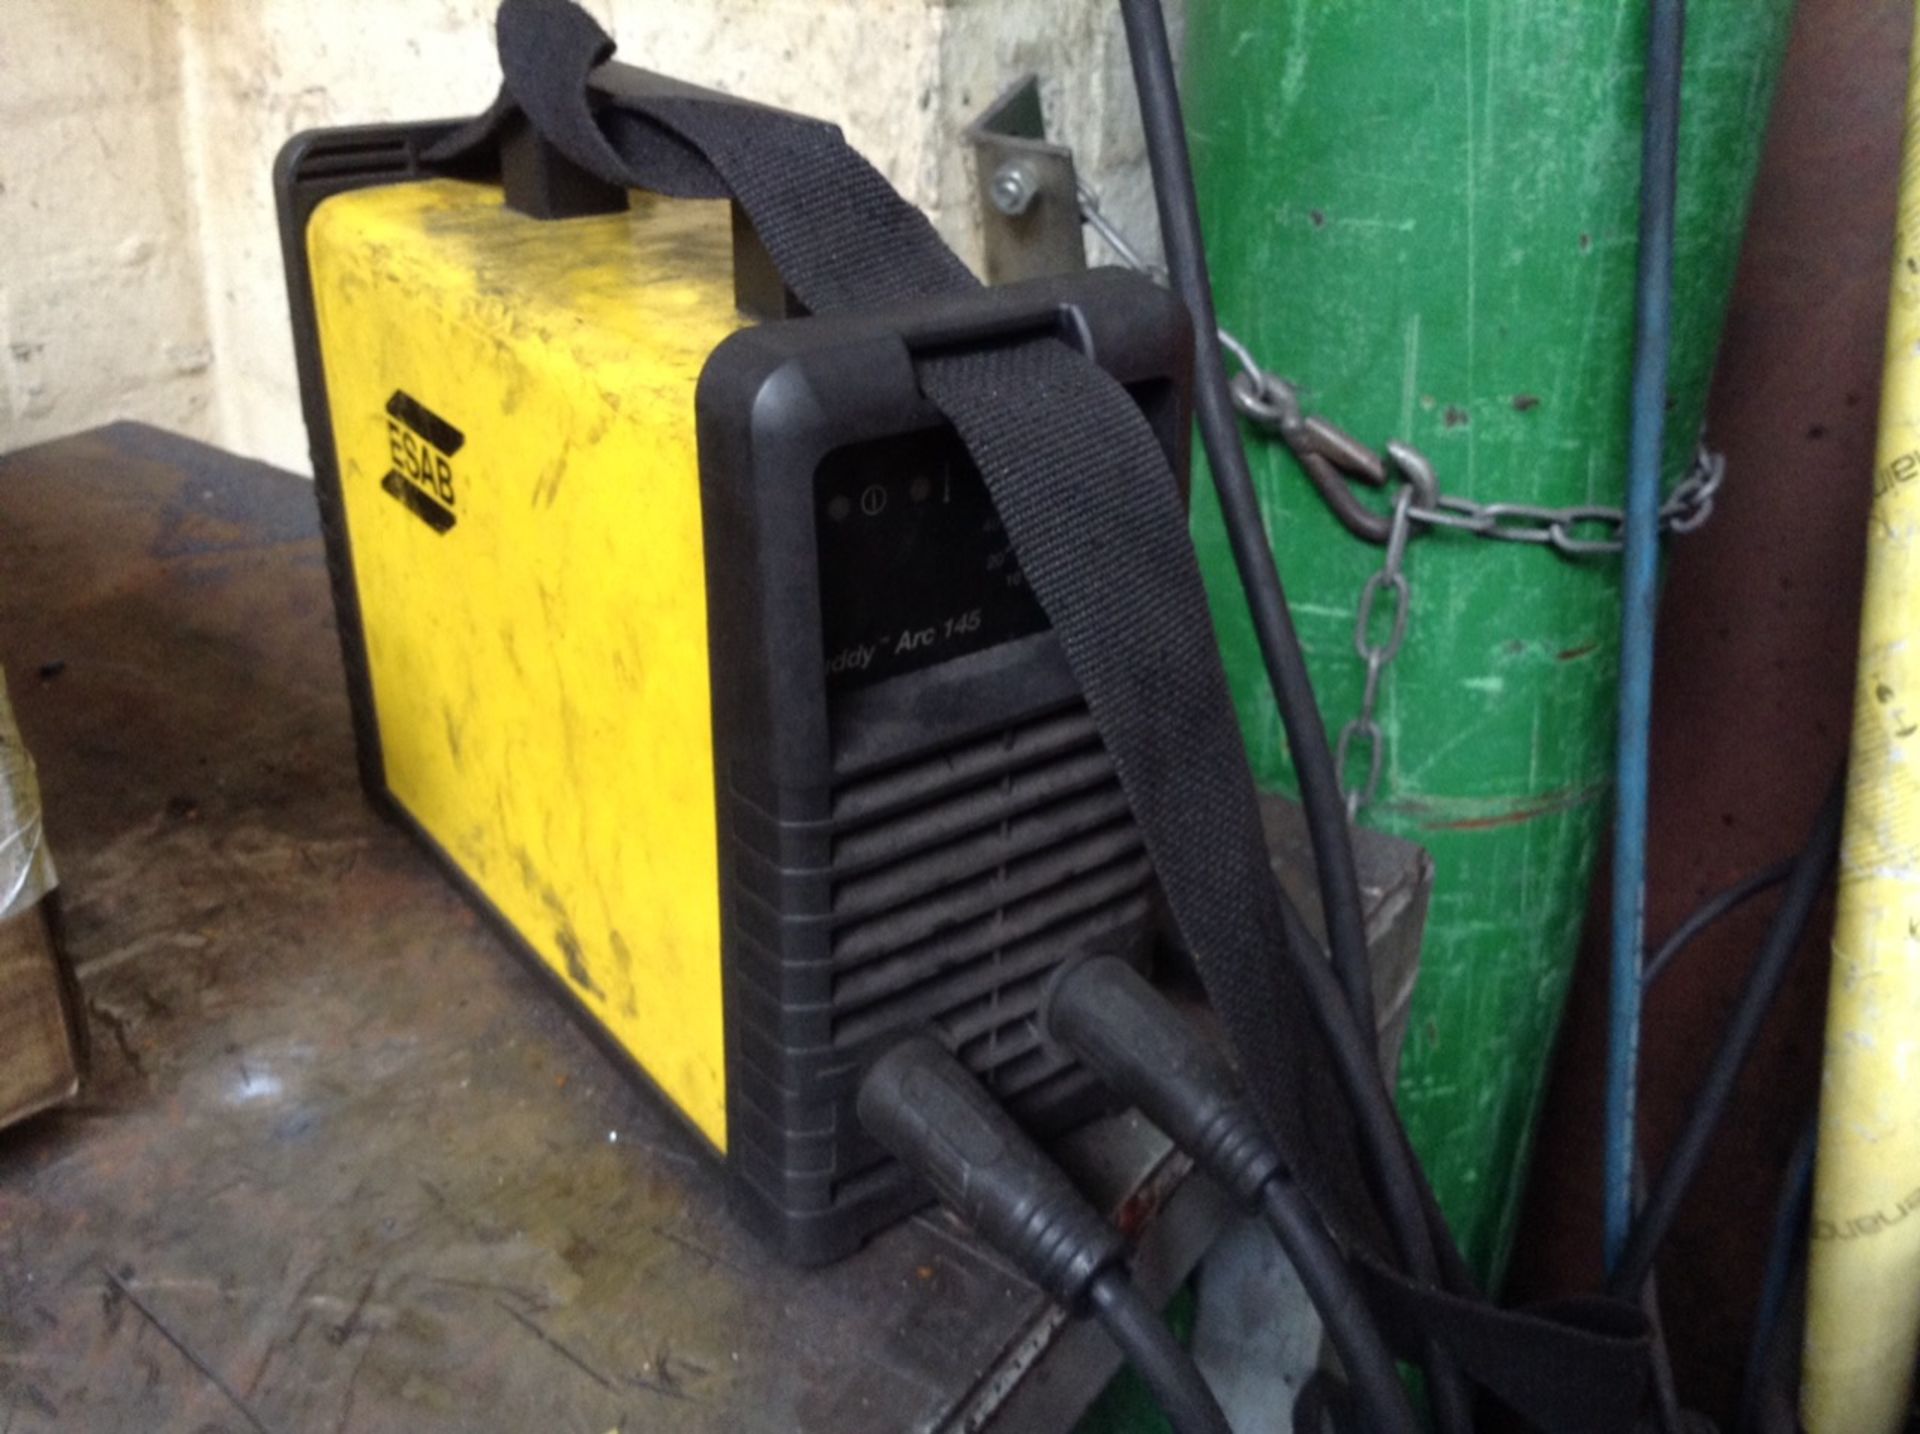 1 Kemppi , Kempack 200, Mig welder with WU-10 cooler, cables, foot controller and an Esab Buddy Arc - Image 3 of 4